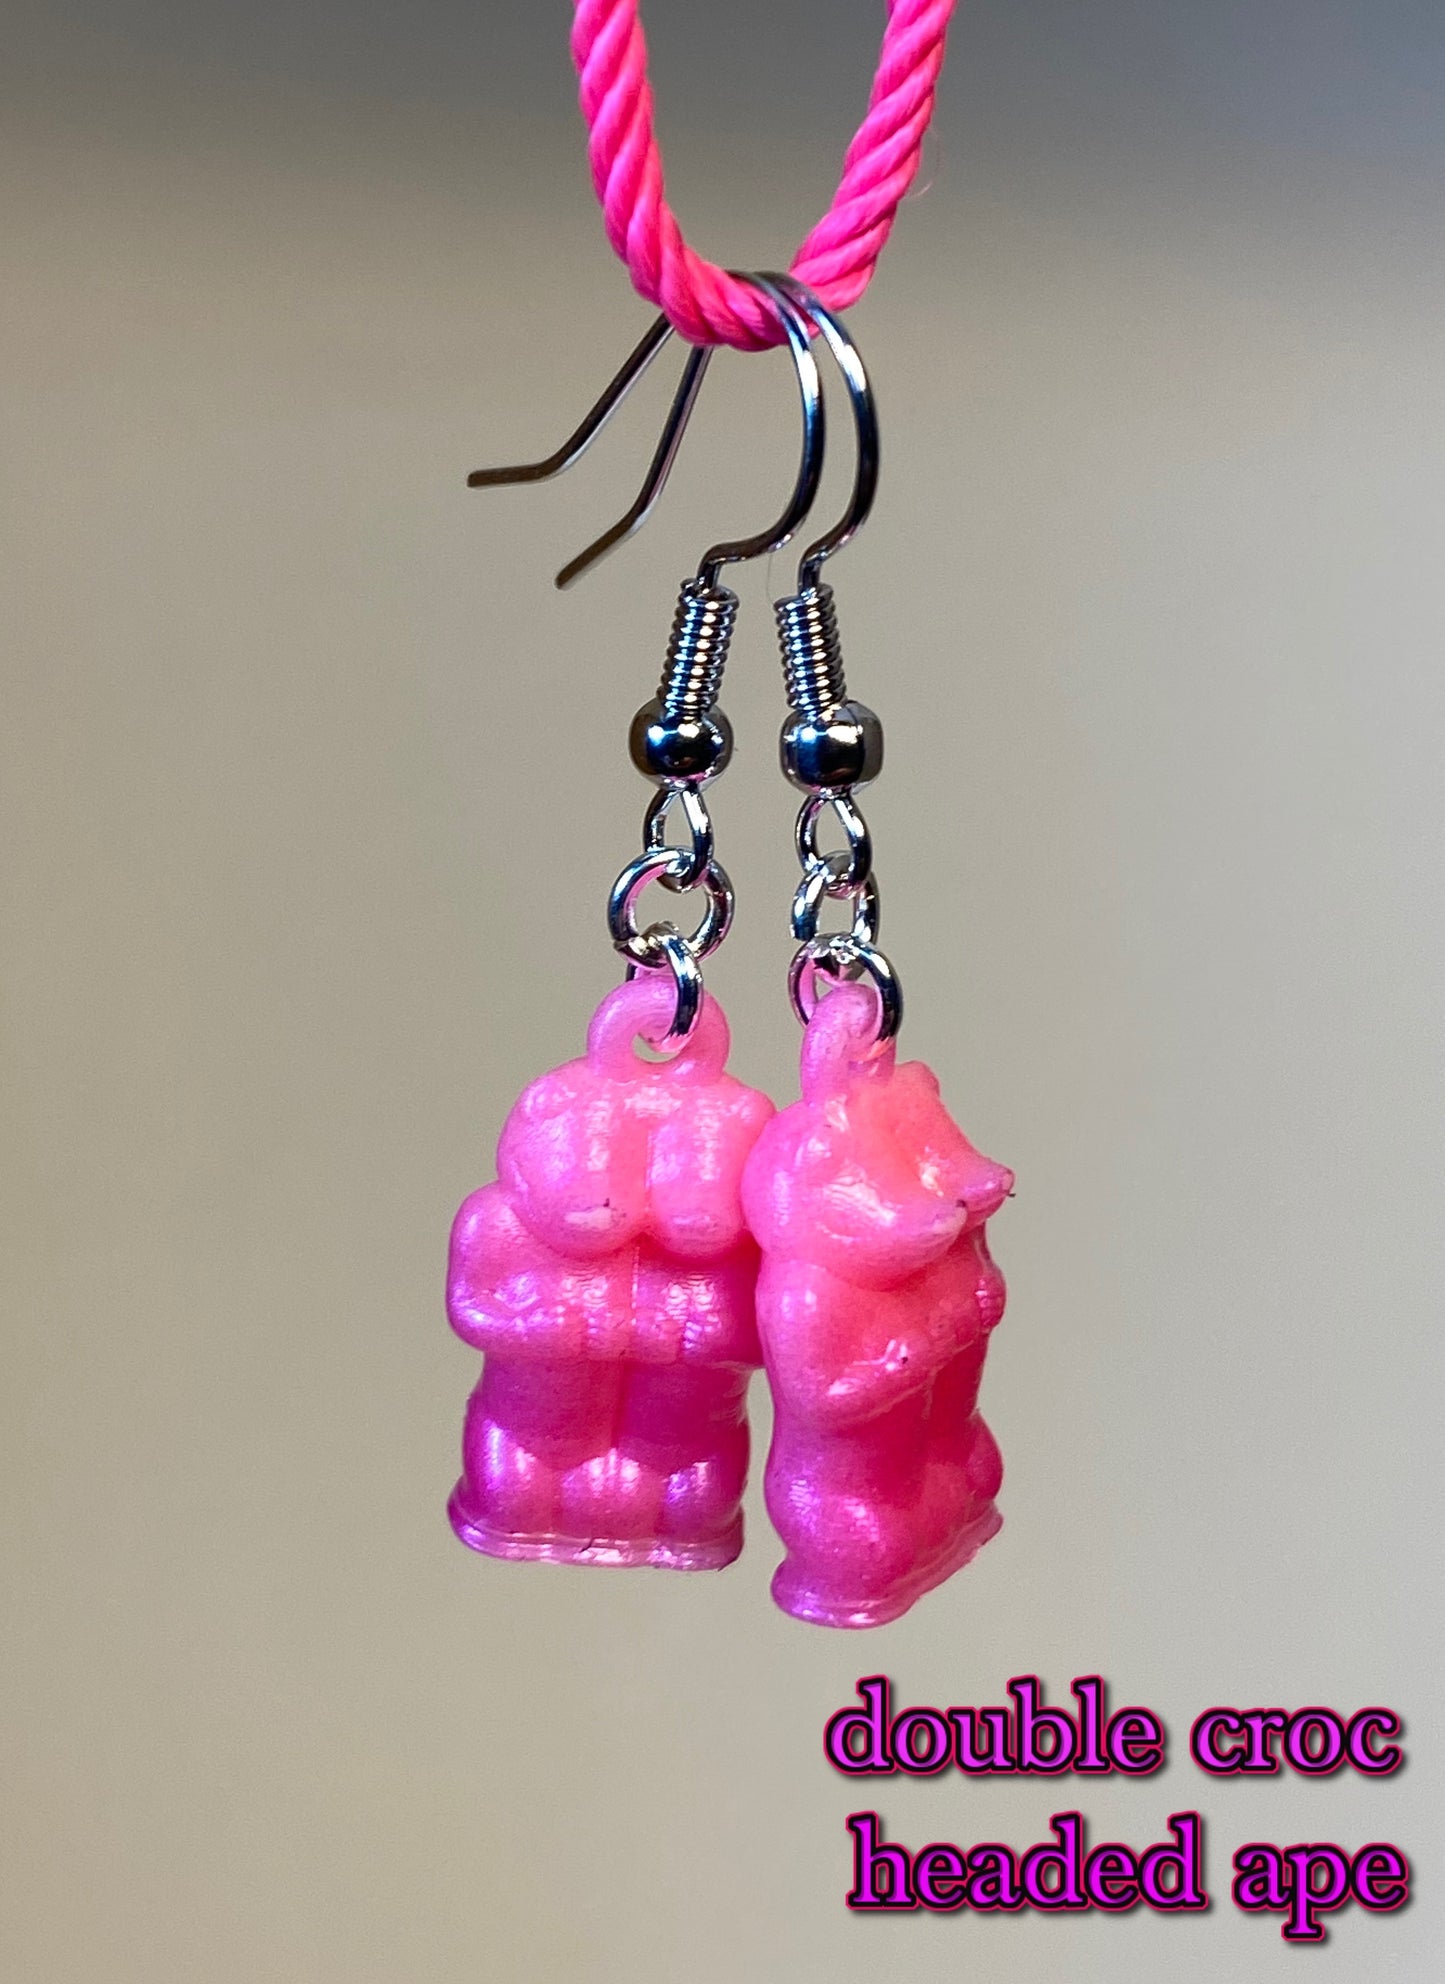 Pastel and Iridescent Pink Earrings